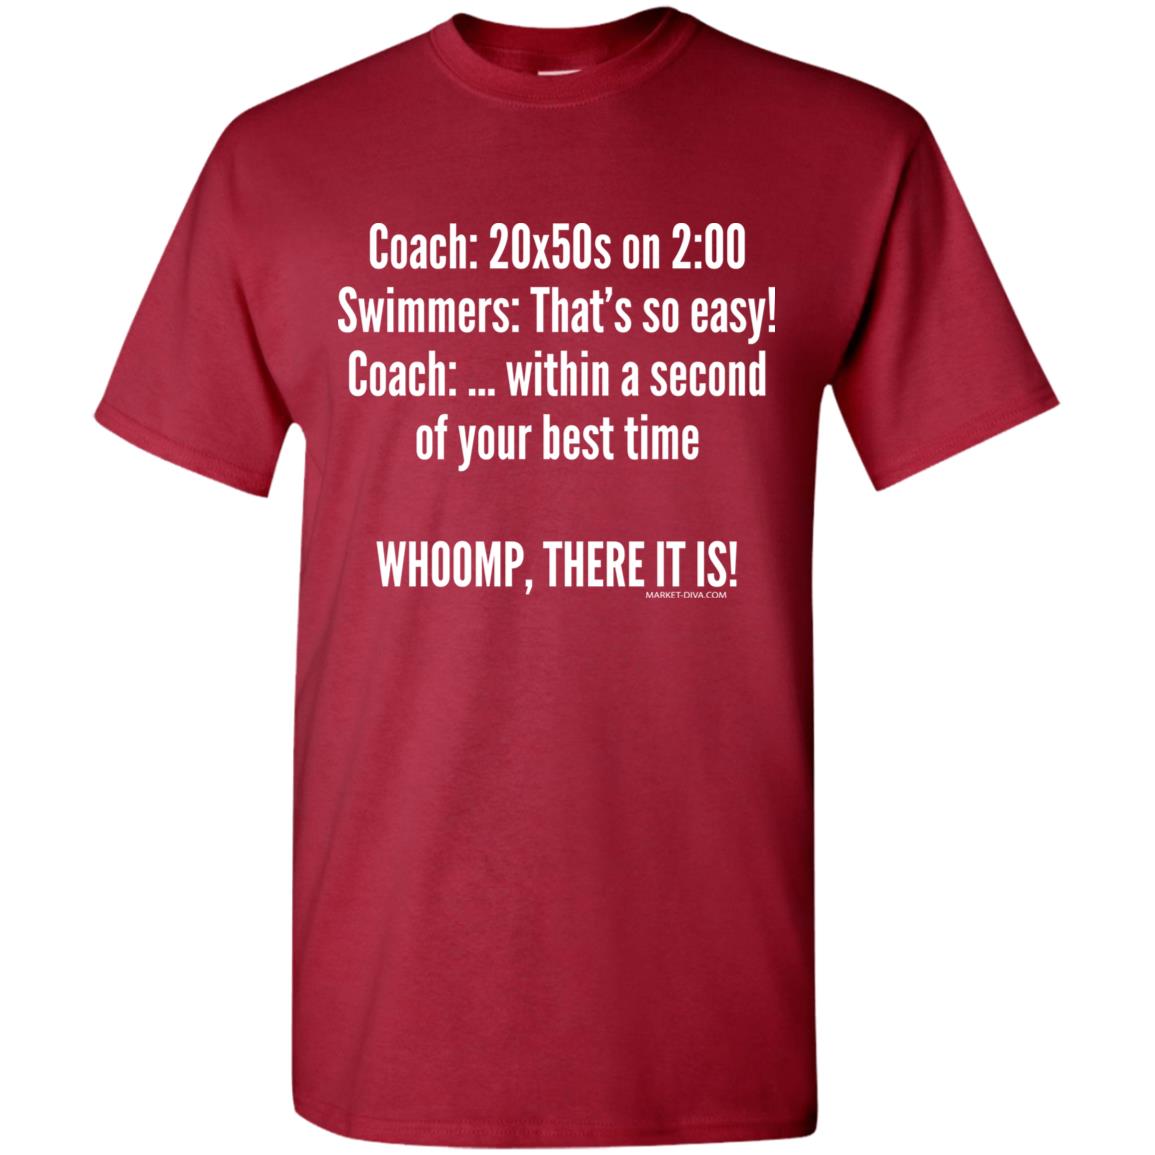 Coach Set - Whoomp There it is